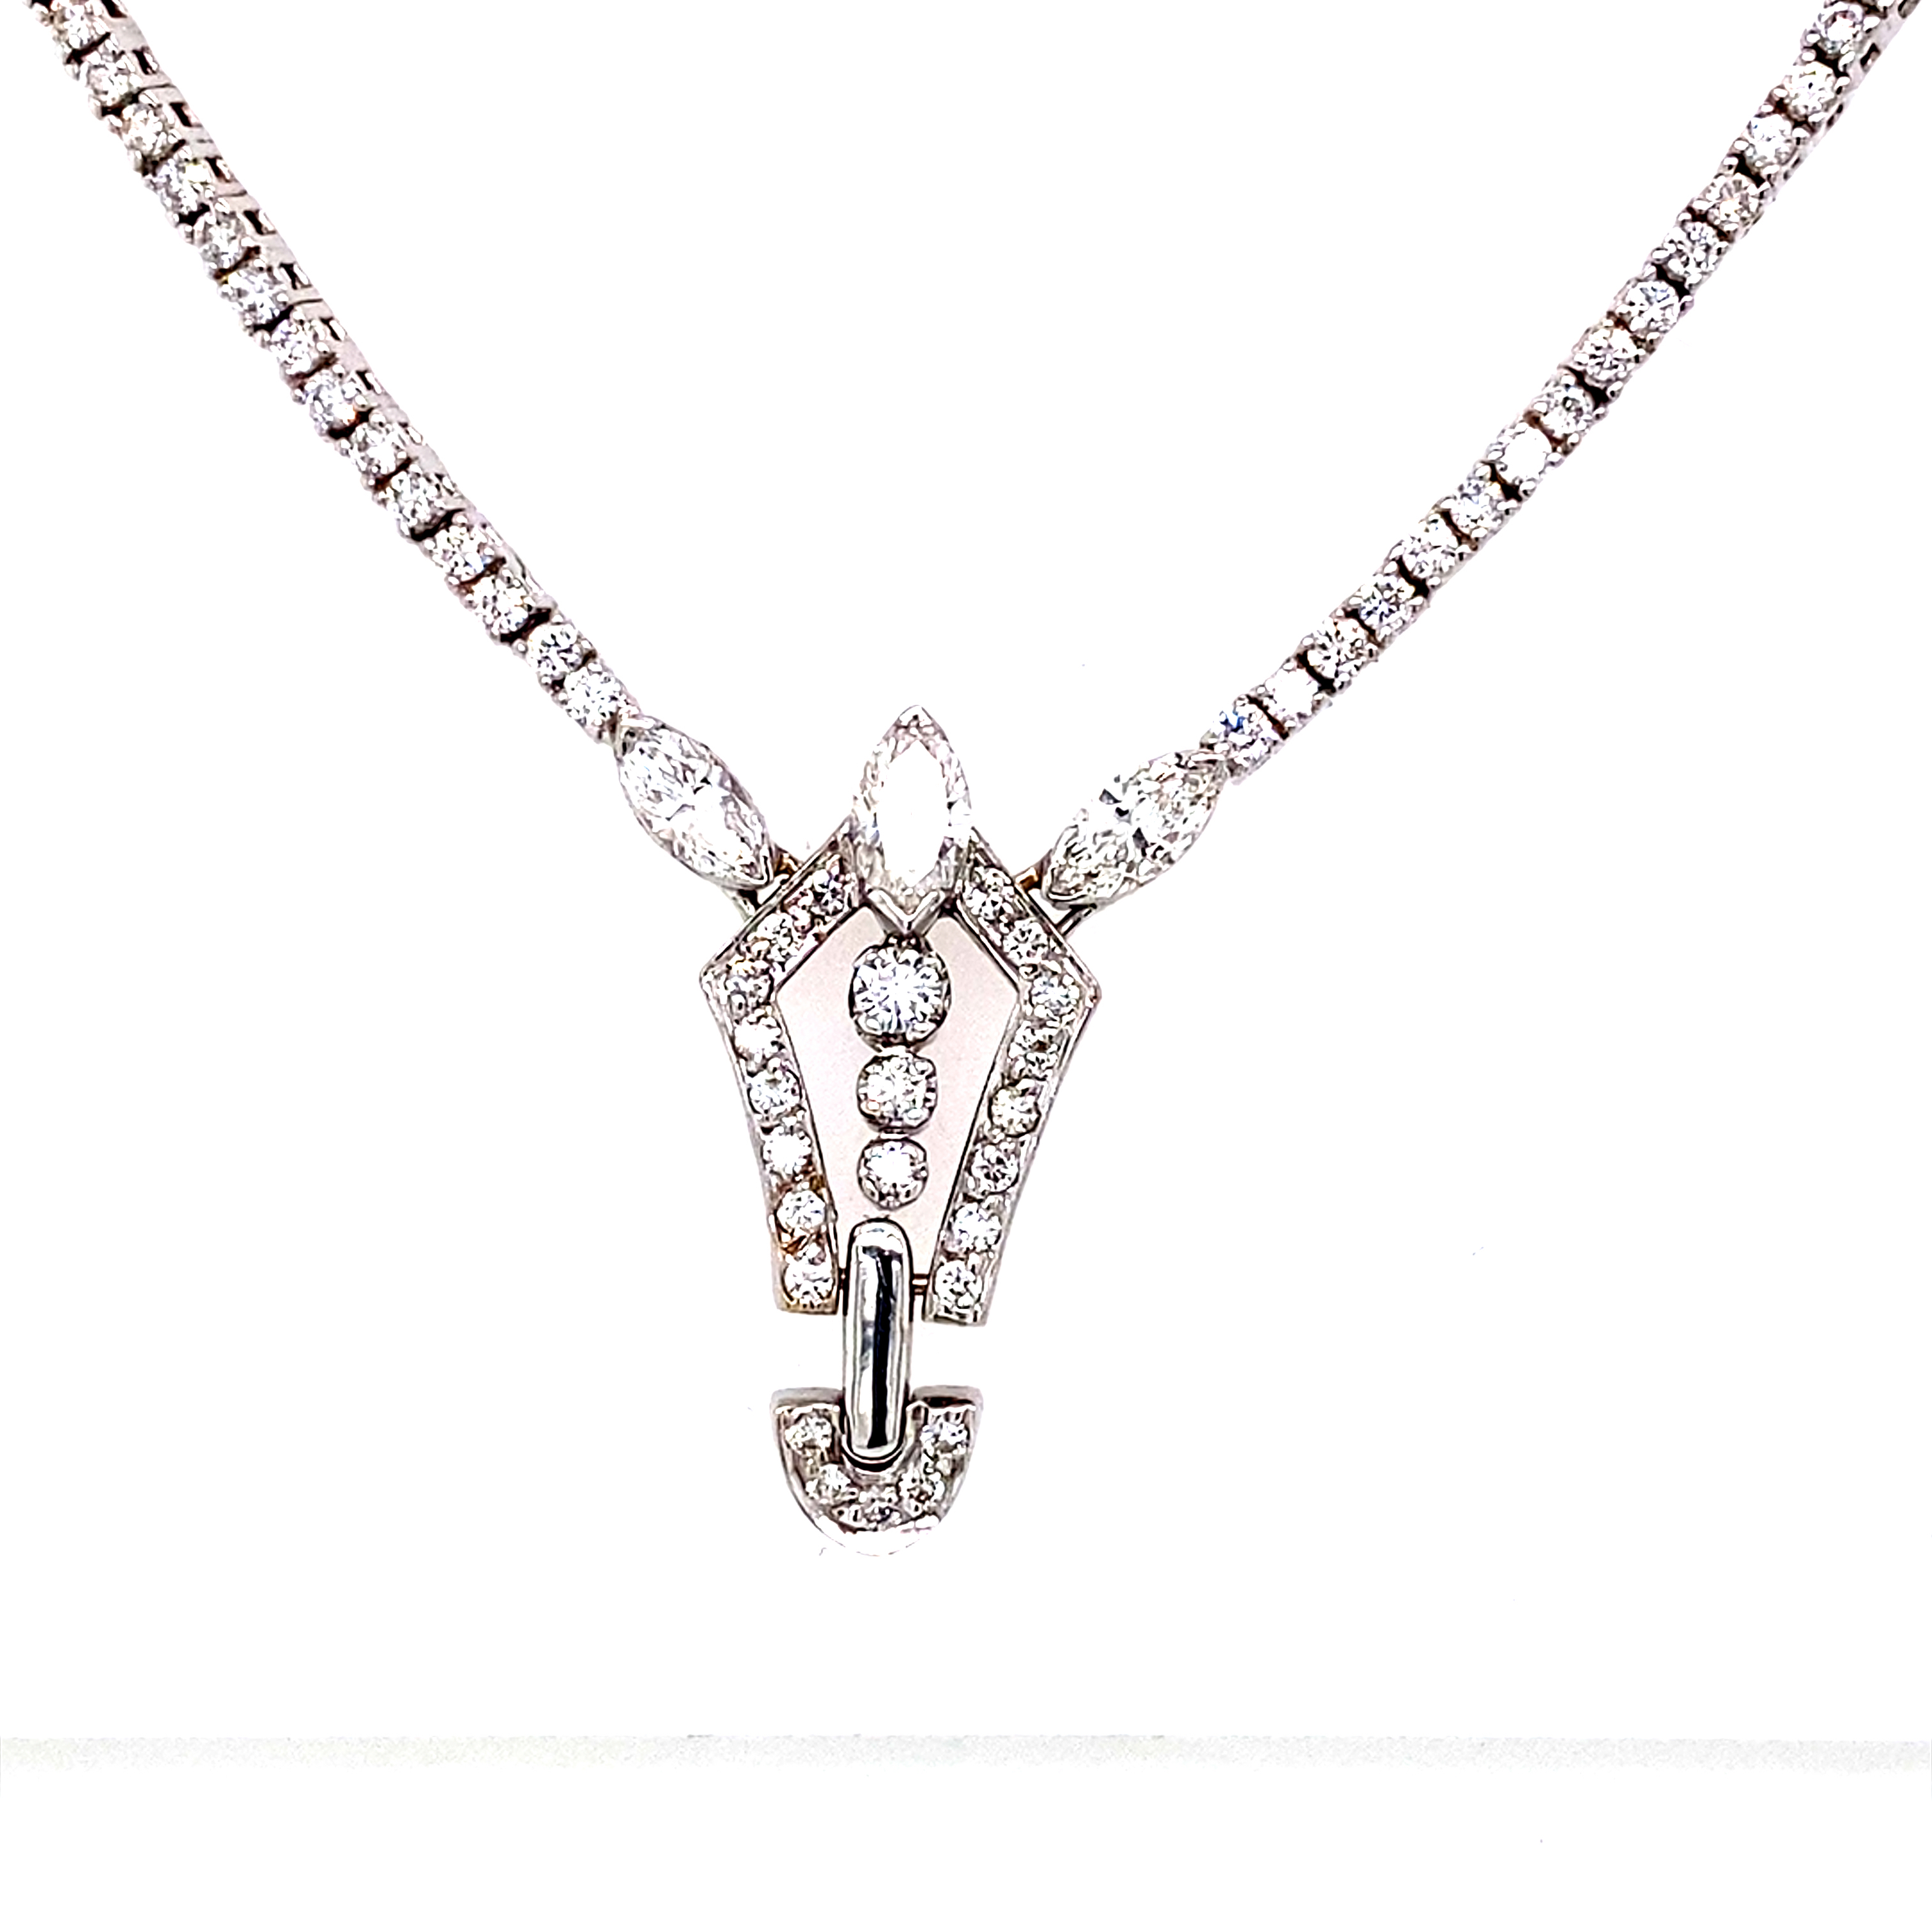 18 Carat White Gold and Diamond Deco Style necklet